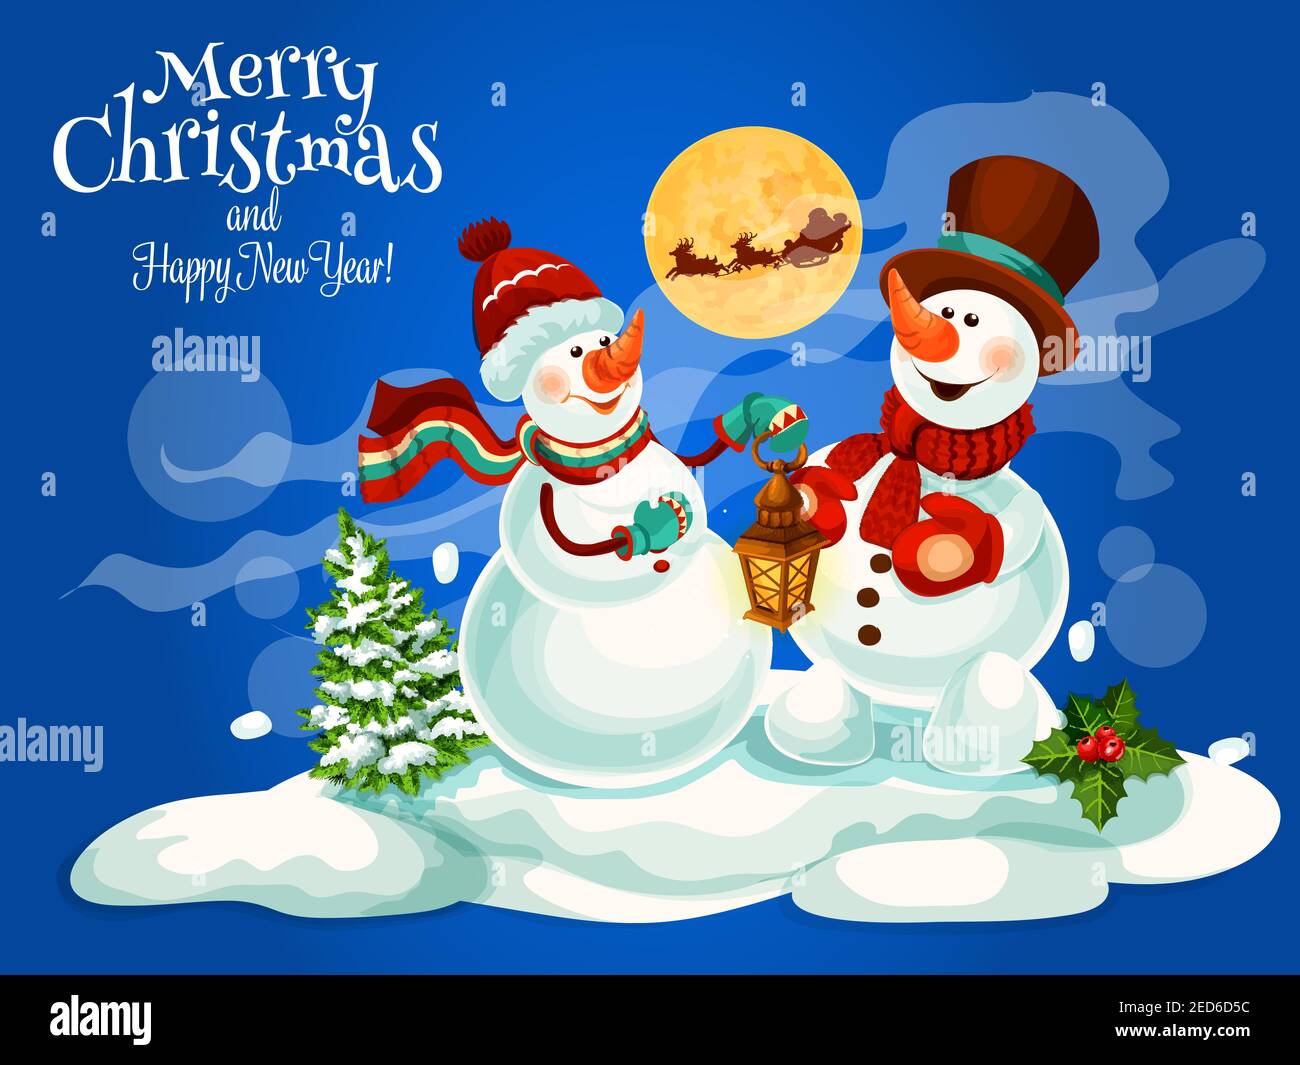 Merry Christmas and Happy New Year greeting card with vector ...